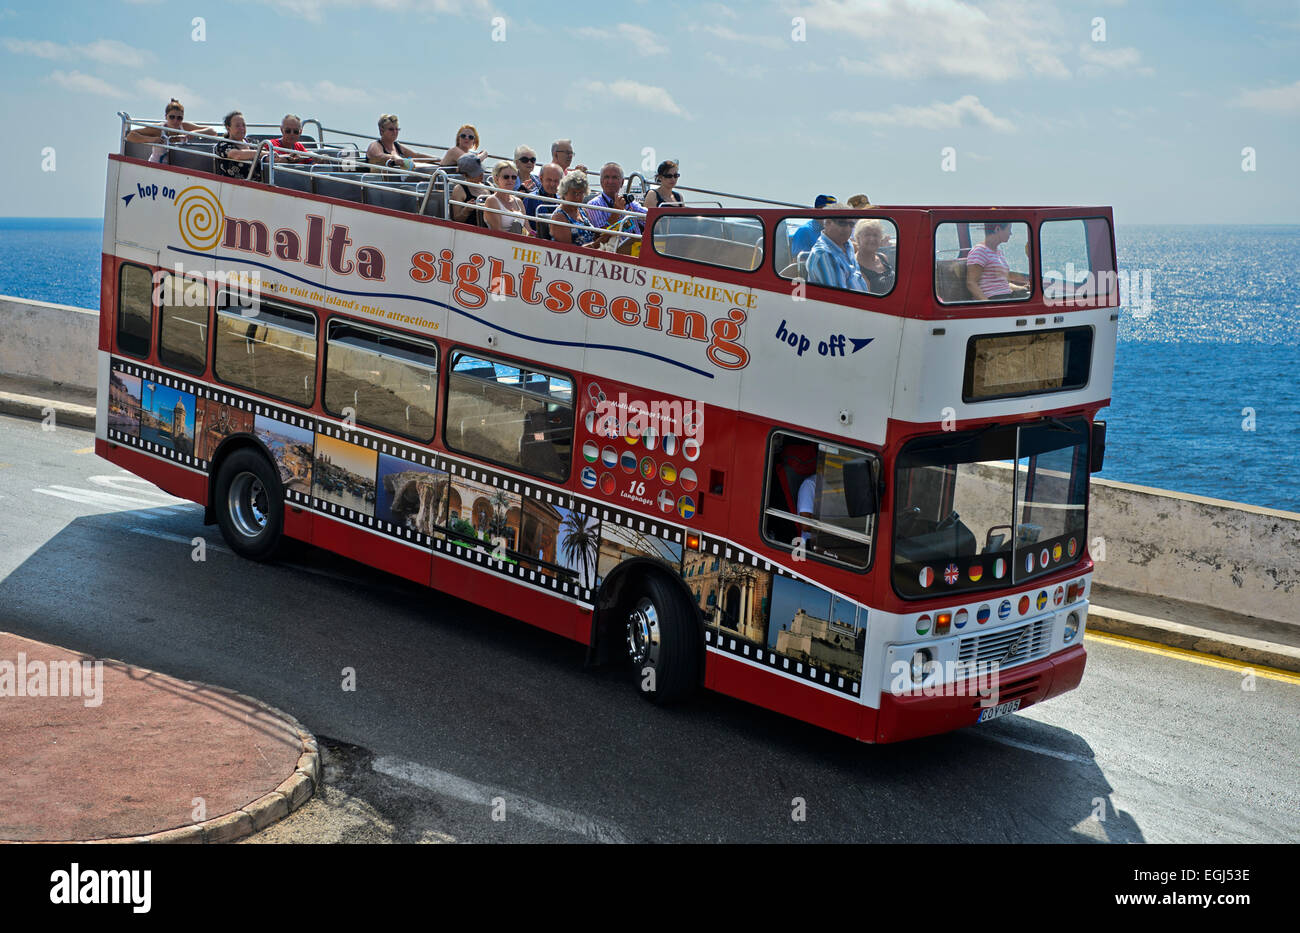 tourists-in-an-open-top-double-decker-bus-on-an-excursion-at-the-coast-EGJ53E.jpg